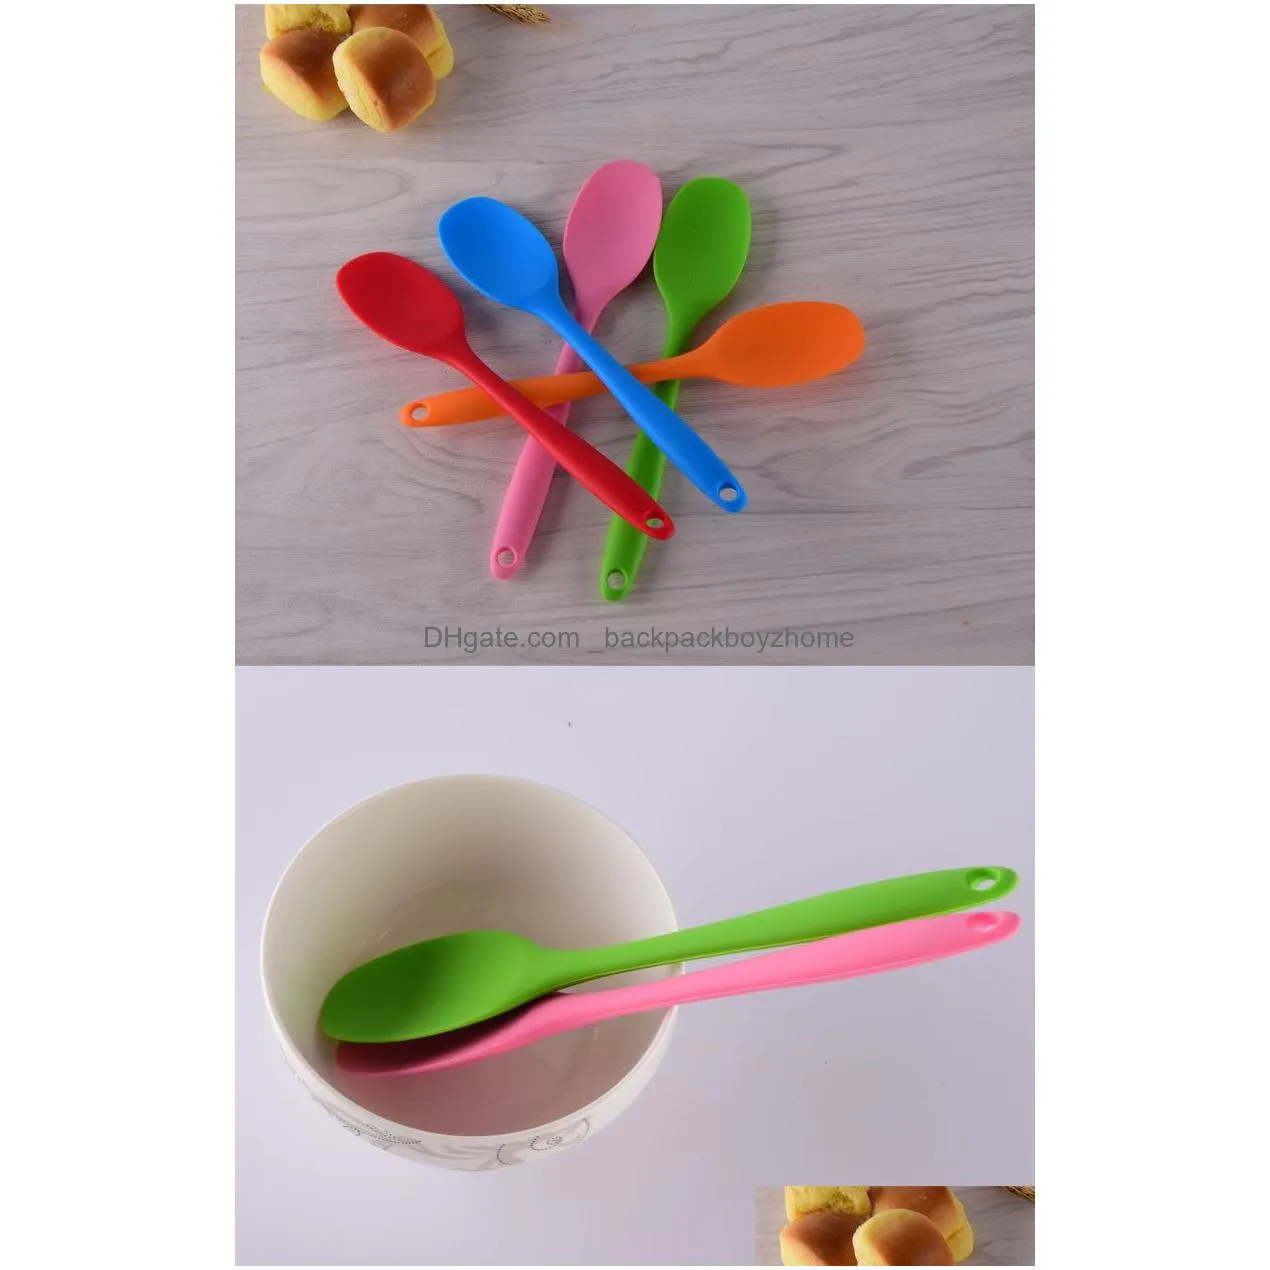 cake butter spatula silicone spoon mixing spoons long-handled cooking utensils tableware kitchen soup spoon mixer kitchen tools